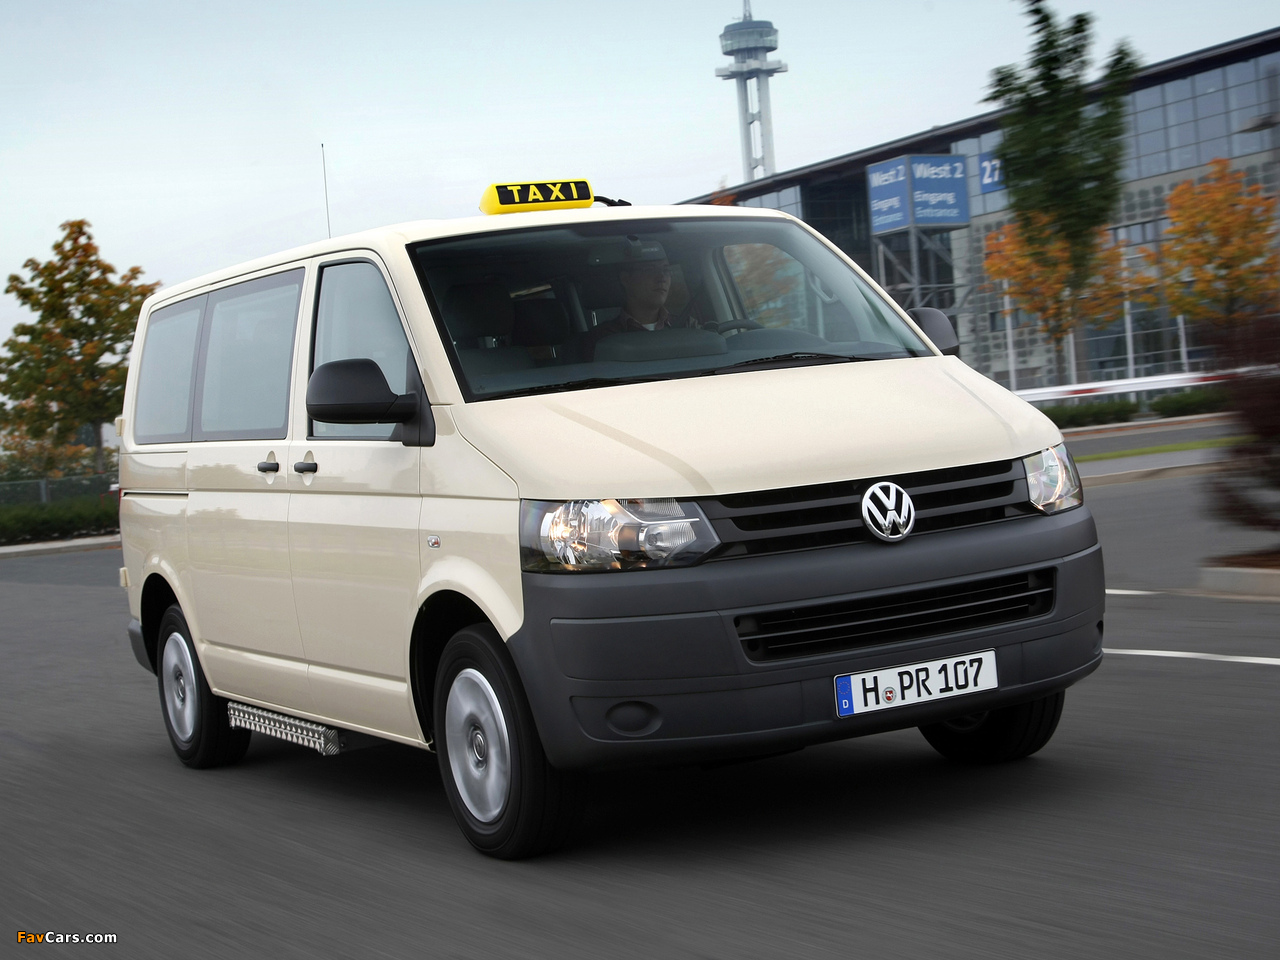 Volkswagen T5 Caravelle Taxi 2009 photos (1280 x 960)